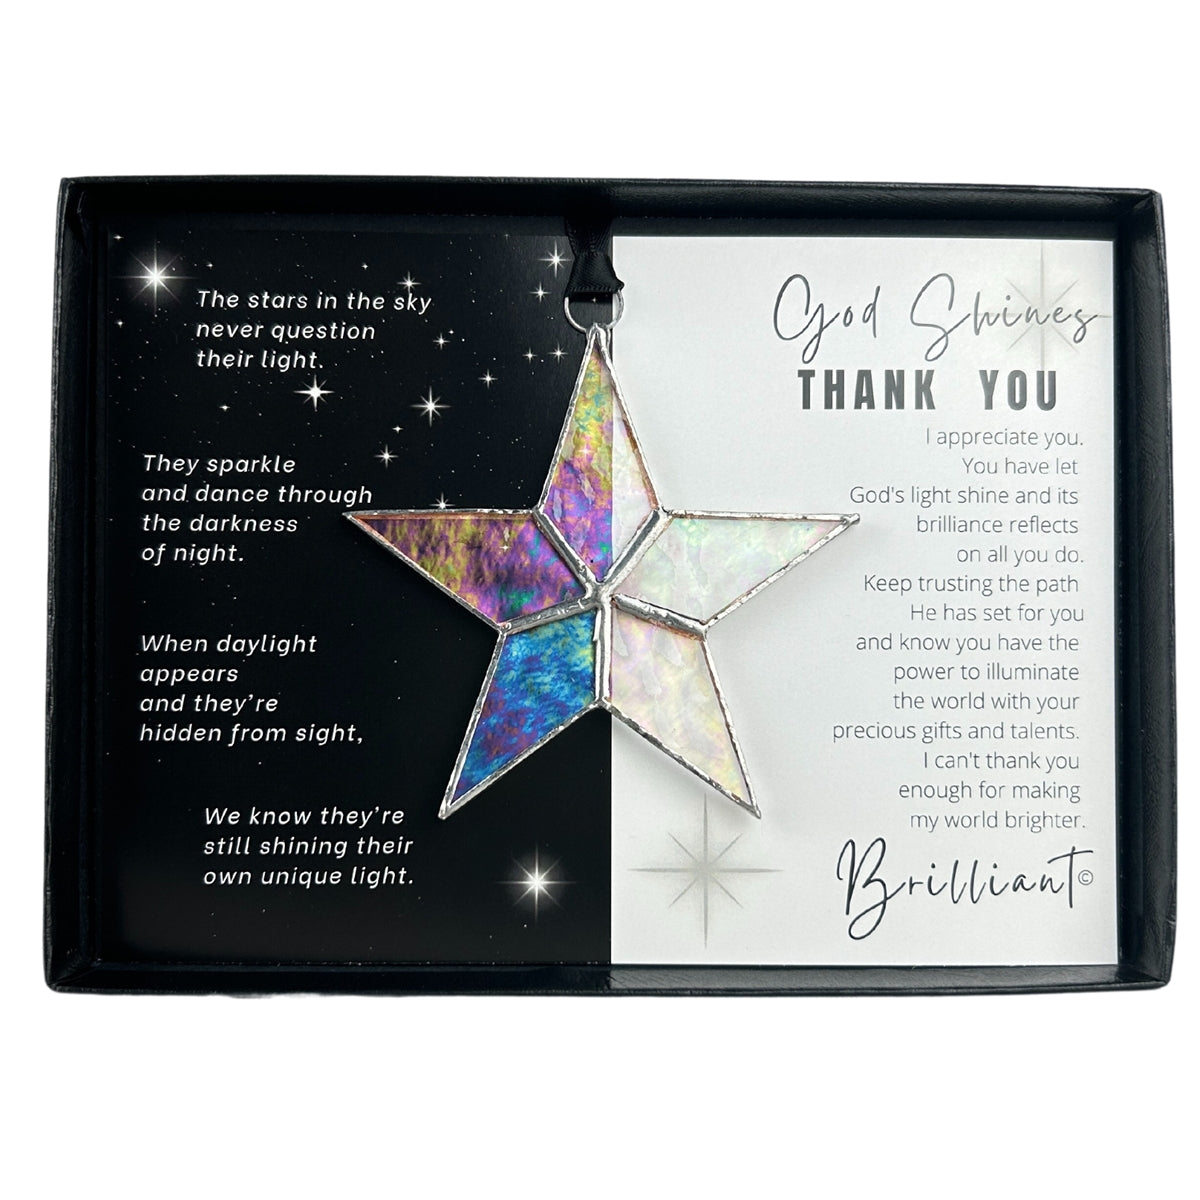 Handmade 4&quot; clear iridescent stained glass star with silver edging, packaged with &quot;God Shines Thank You&quot; sentiment in black gift box with clear lid.